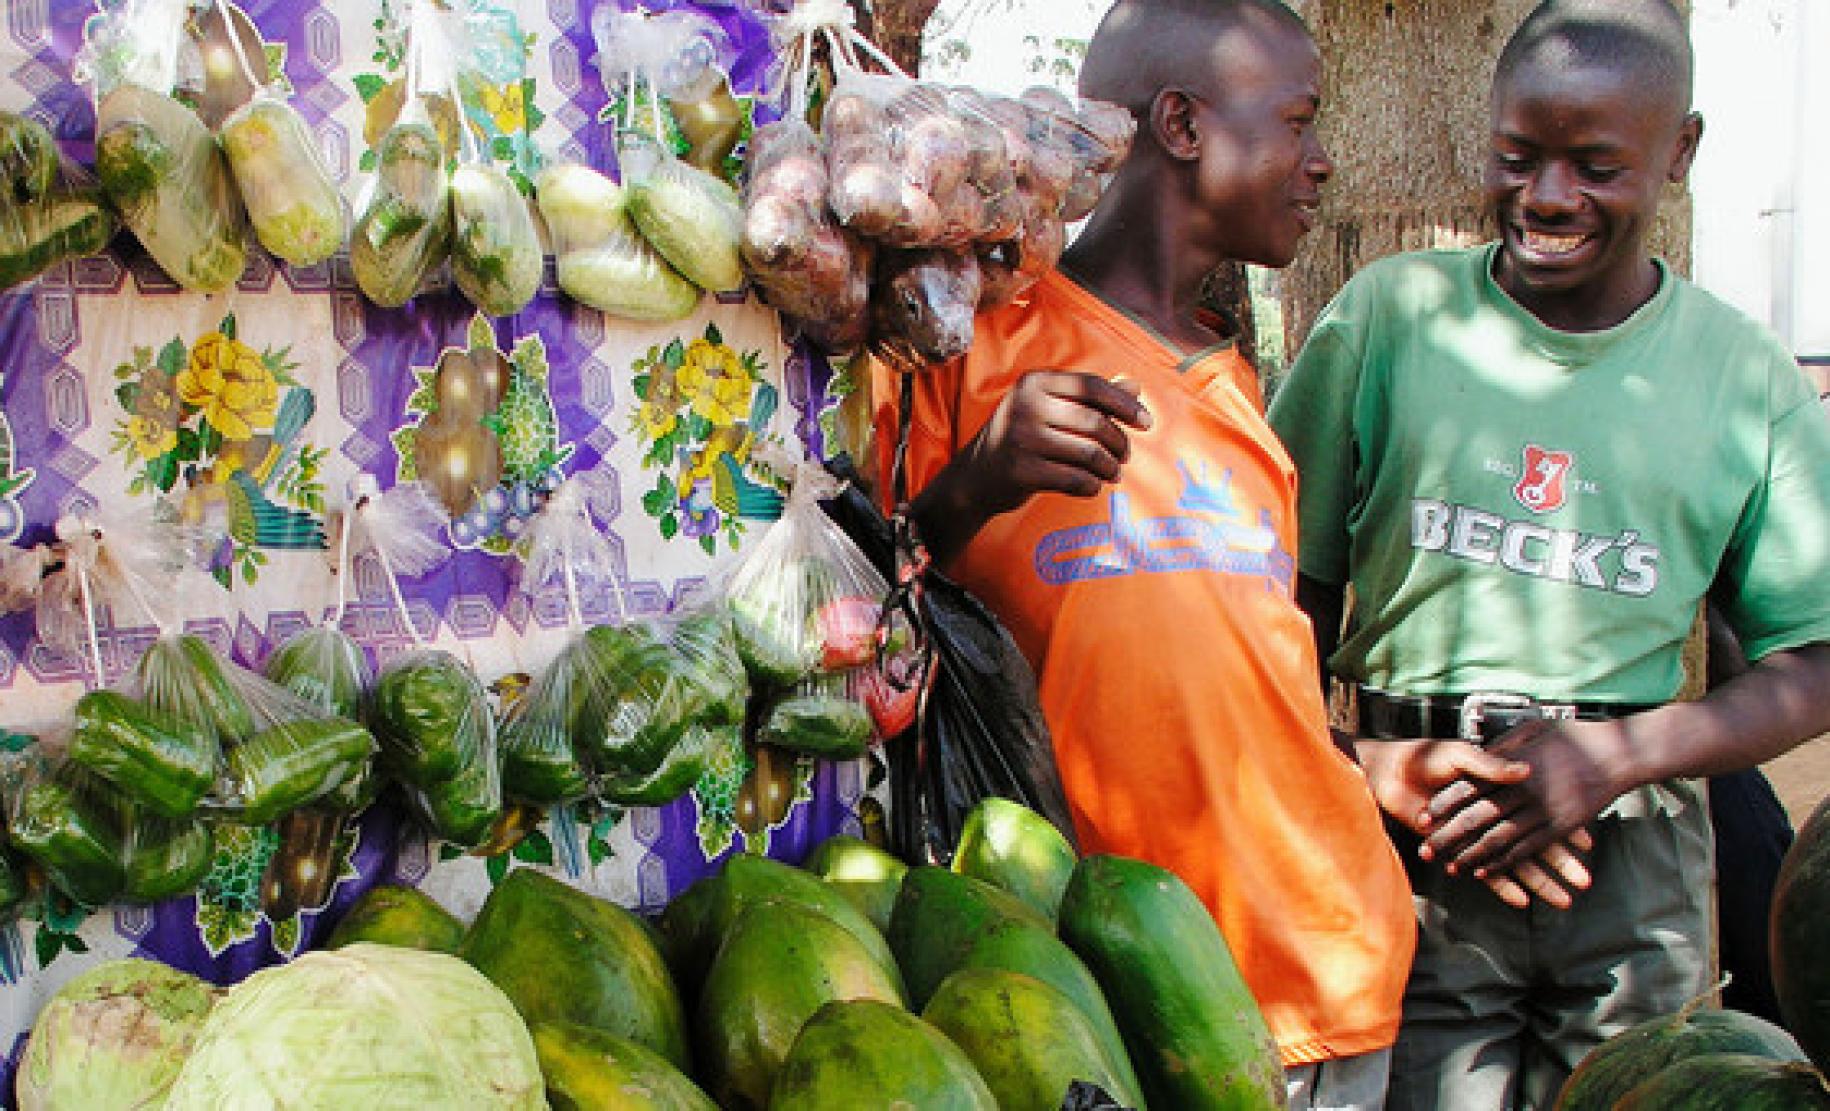 Two market vendors chat by a vegetable stand in a marketplace in Kampala, Uganda.